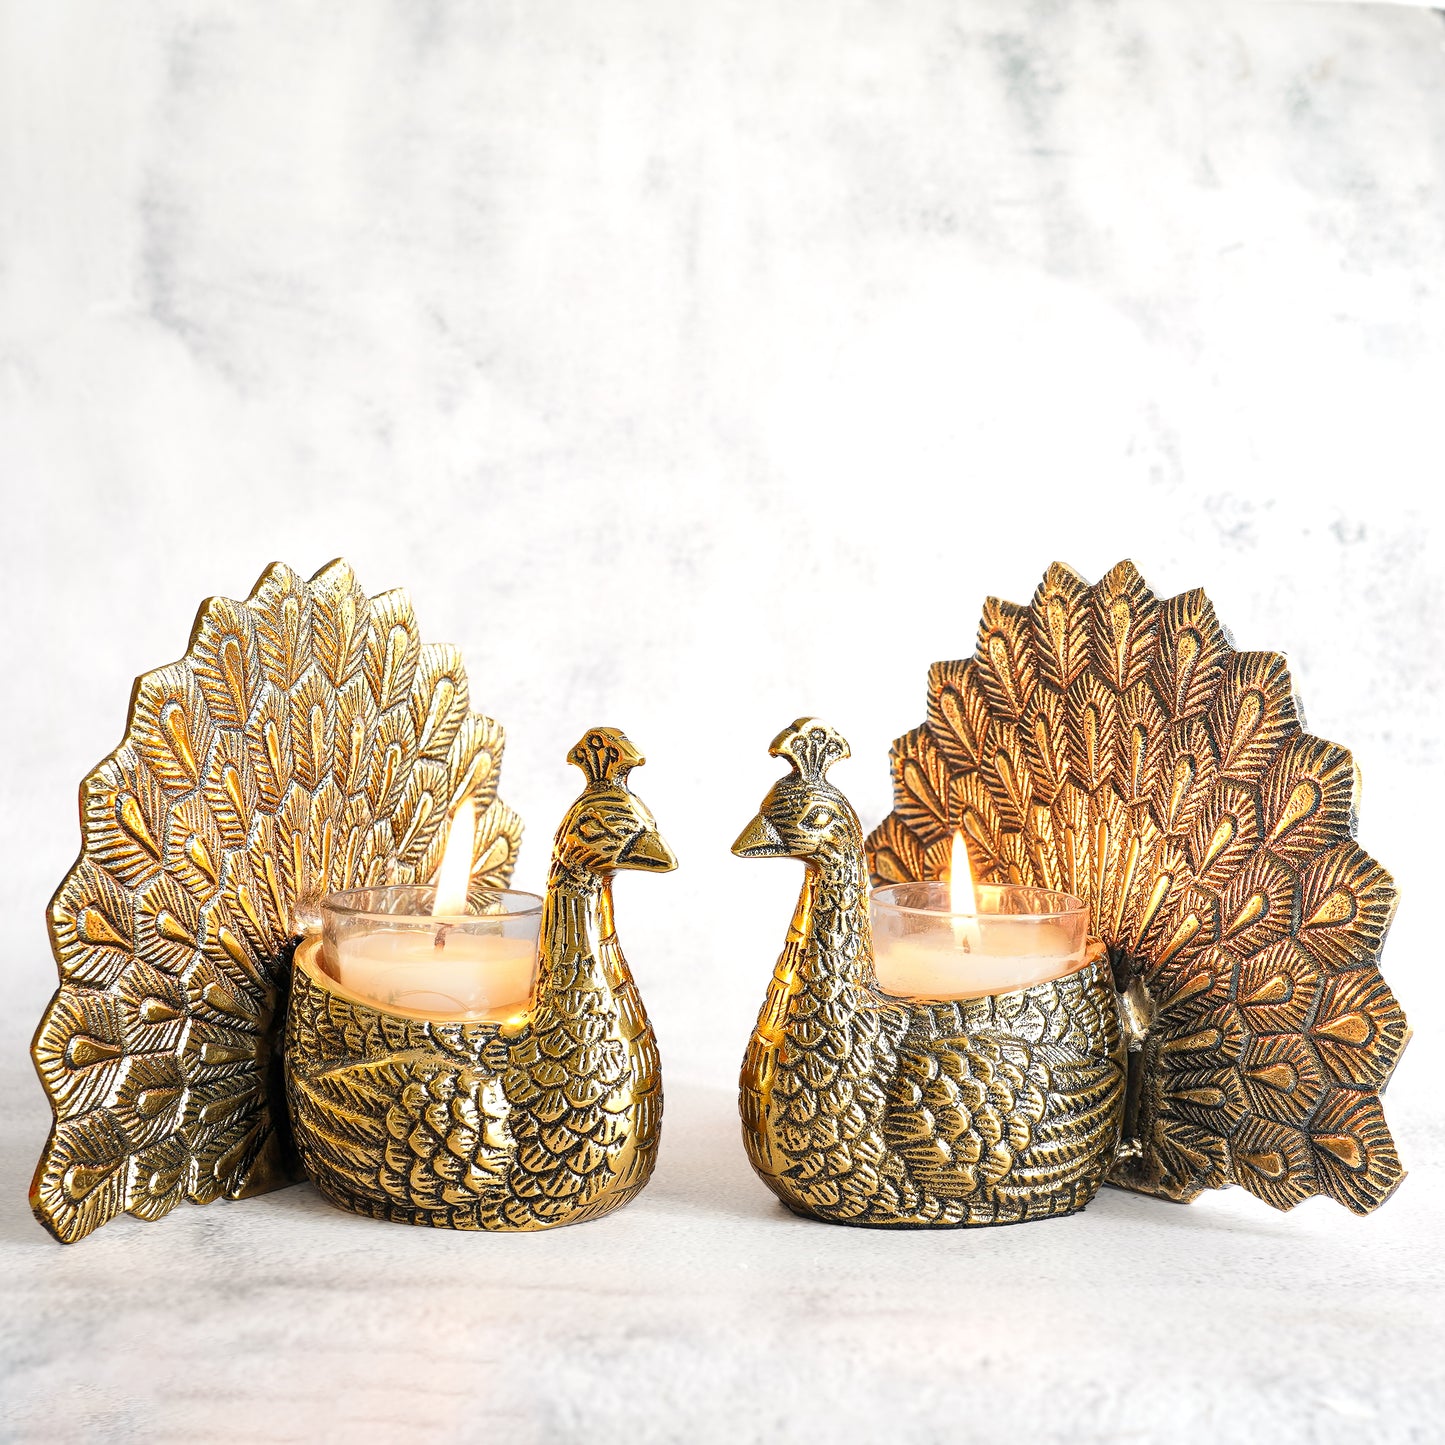 Peacock, Antique Brass finish (Set of 2)